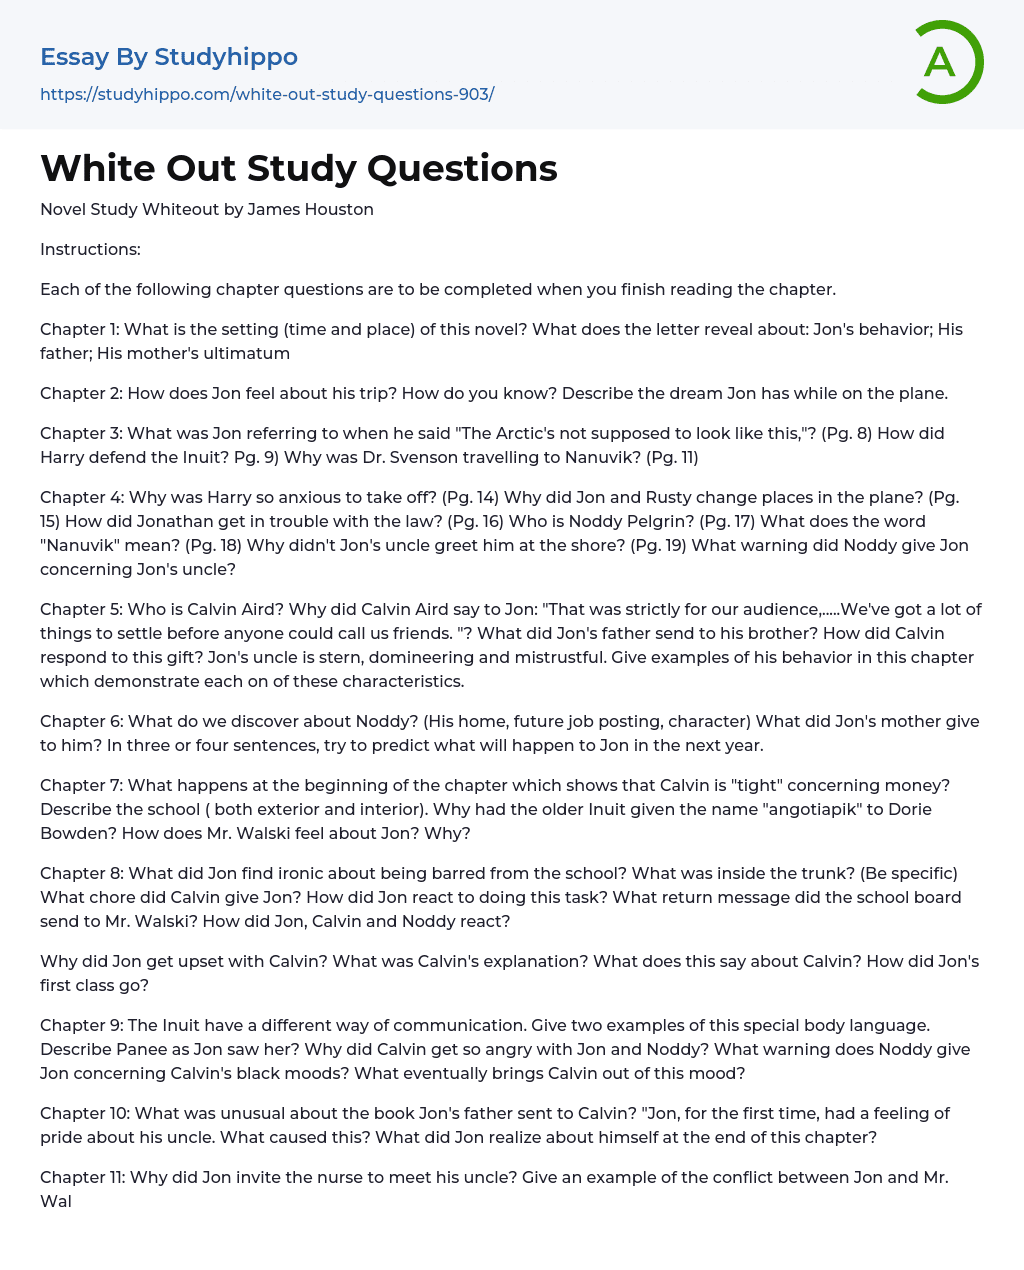 White Out Study Questions Essay Example